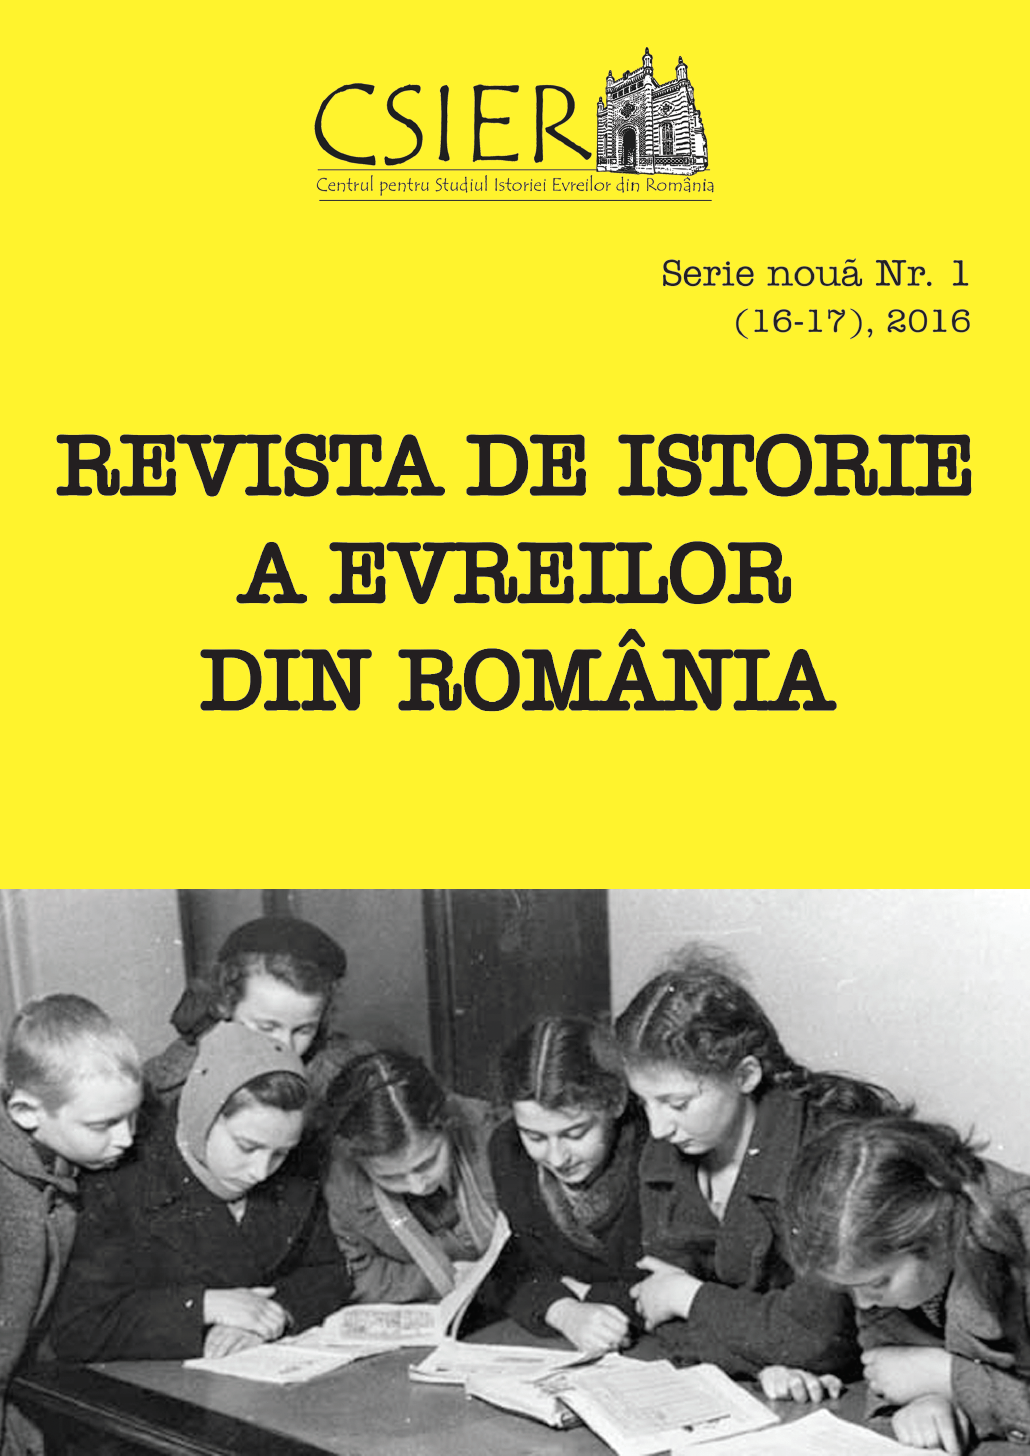 Apologetics and the Search for Roots: The Jewish Past in Romania as Presented in „Revista Cultului Mozaic”, 1956-1976